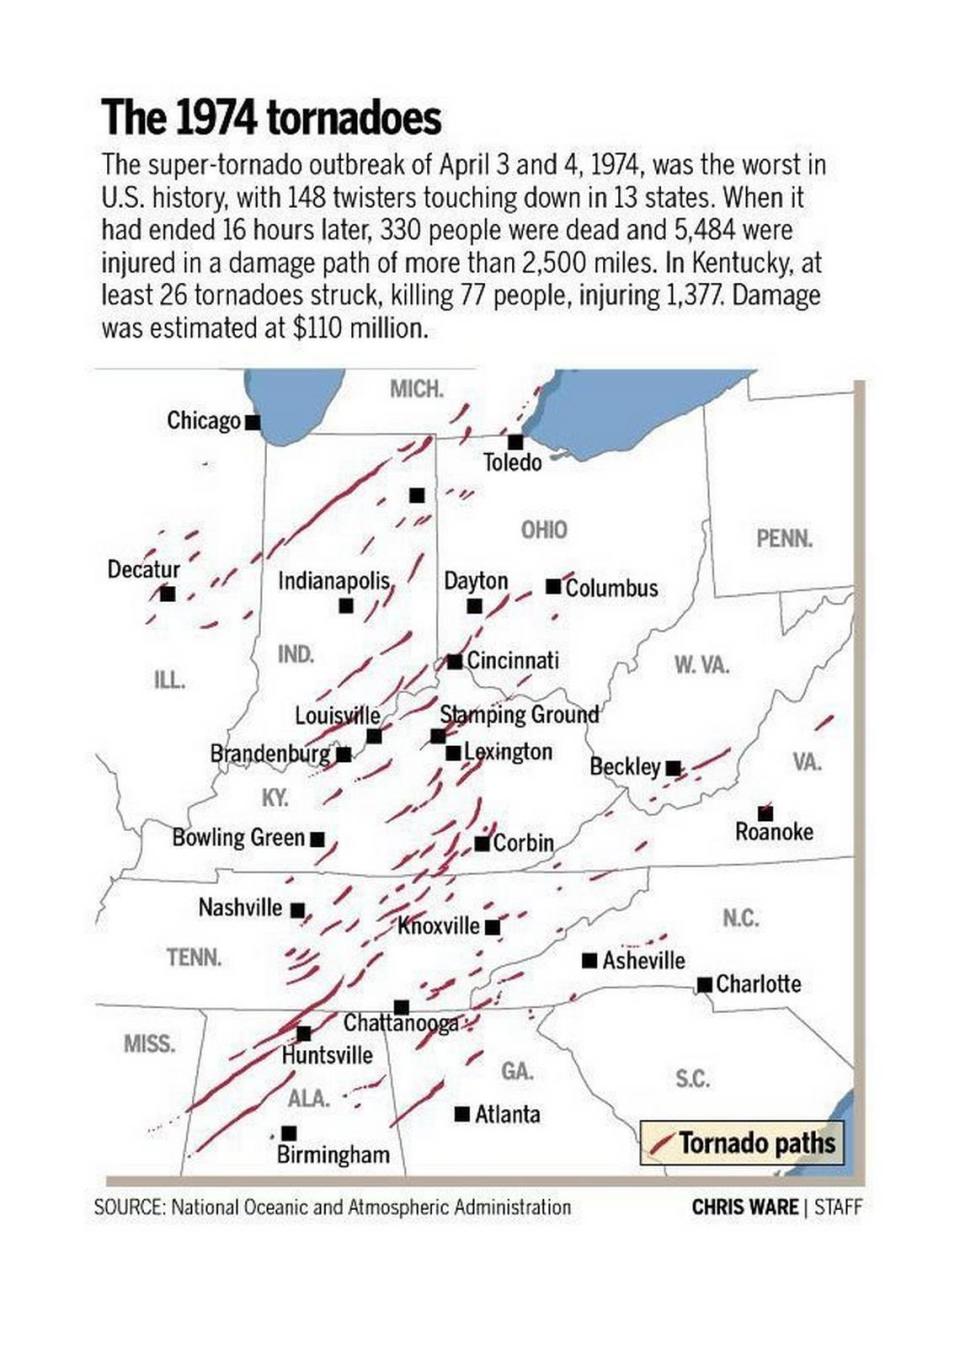 The super-tornado outbreak of April 3 and 4, 1974, was the worst in U.S. history, with 148 twisters touching down in 13 states. When it had ended 16 hours later, 330 people were dead and 5,484 were injured.